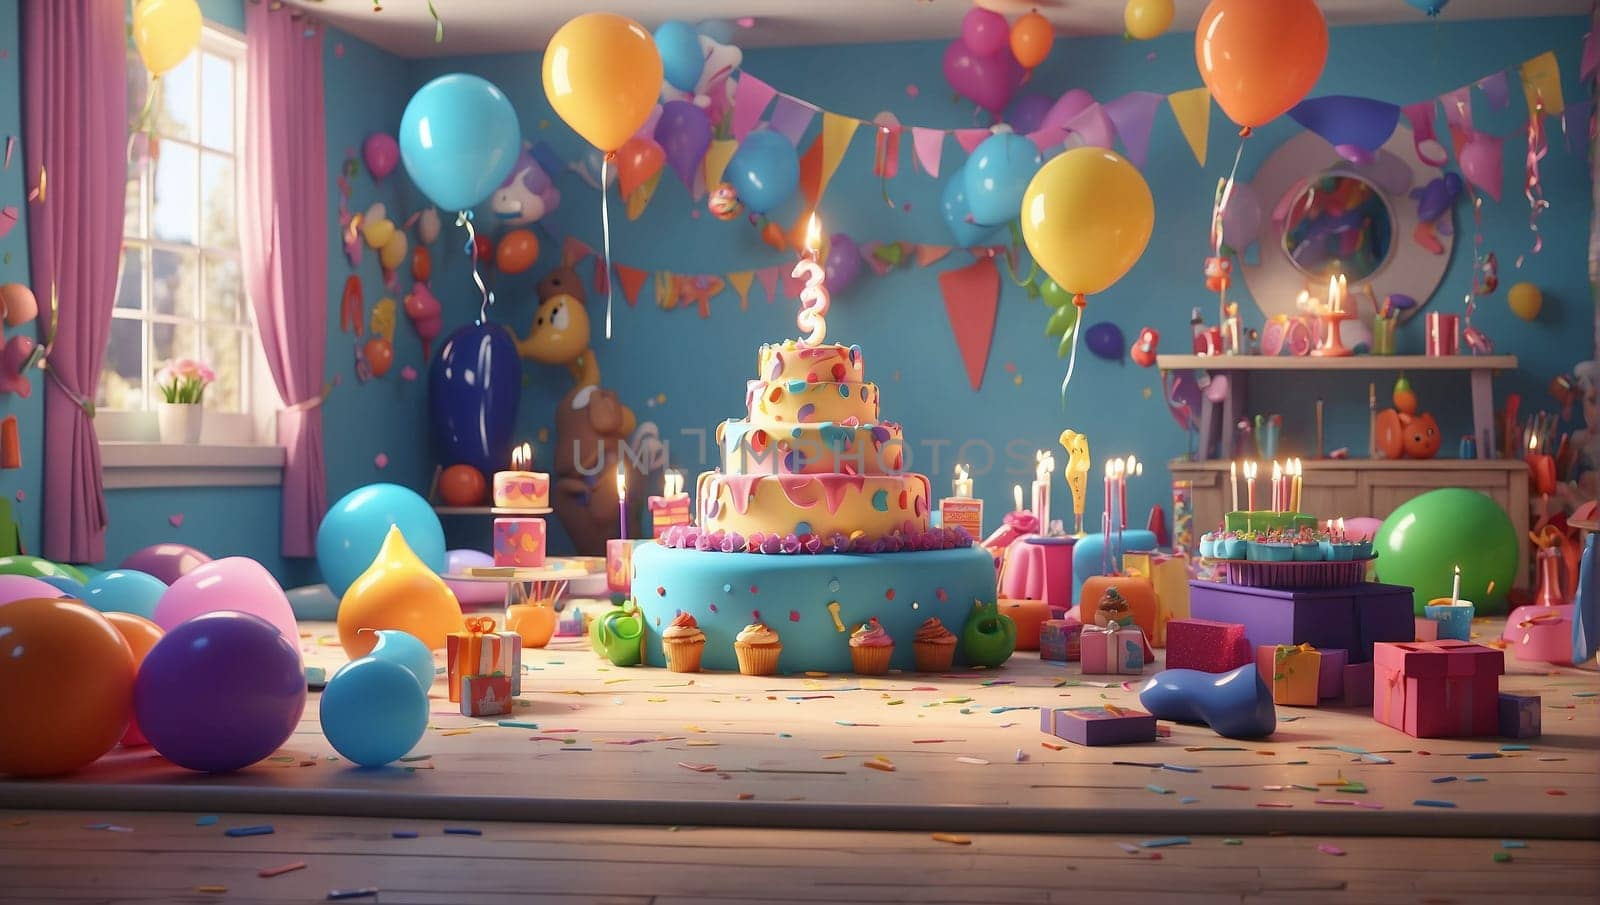 A vibrant birthday cake sits at the center of a festive scene, adorned with colorful balloons and streamers.